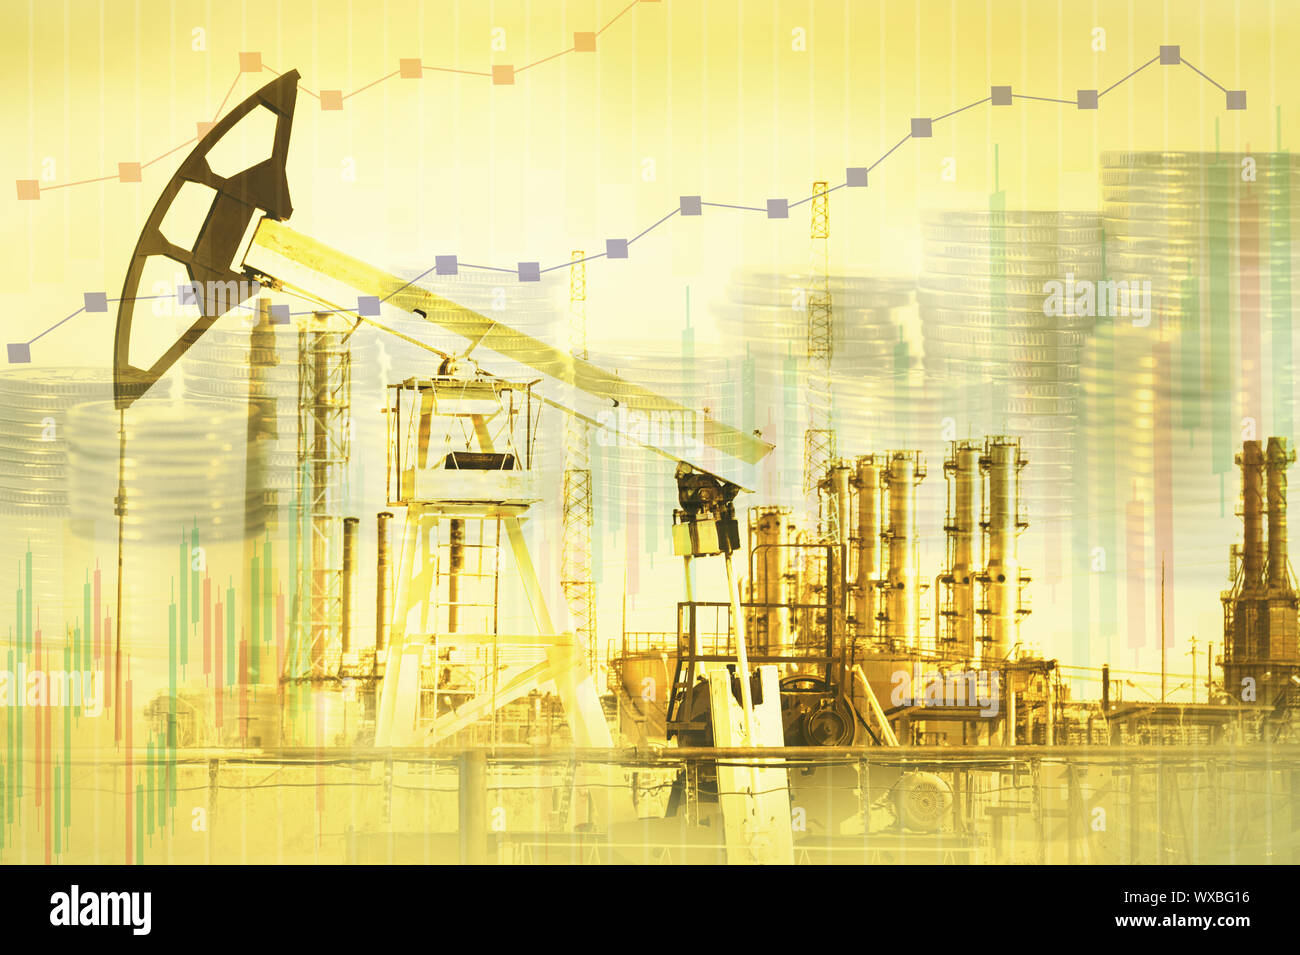 Oil and gas industry, business and financial background. Mining, oil refinery industry and stock market concept. Stock Photo